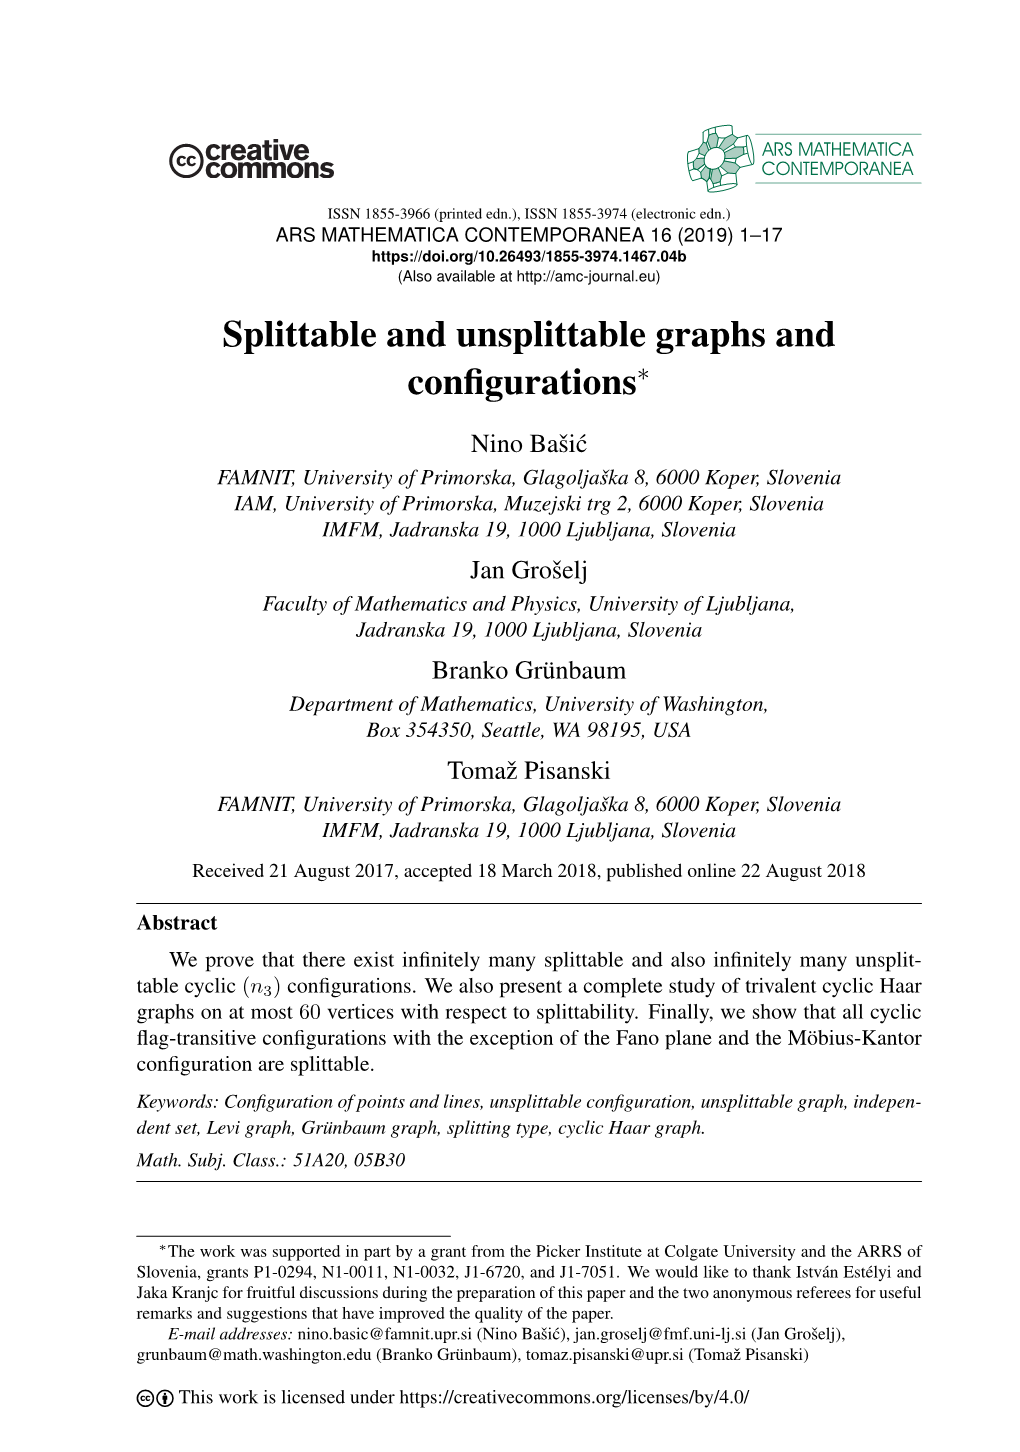 Splittable and Unsplittable Graphs and Configurations